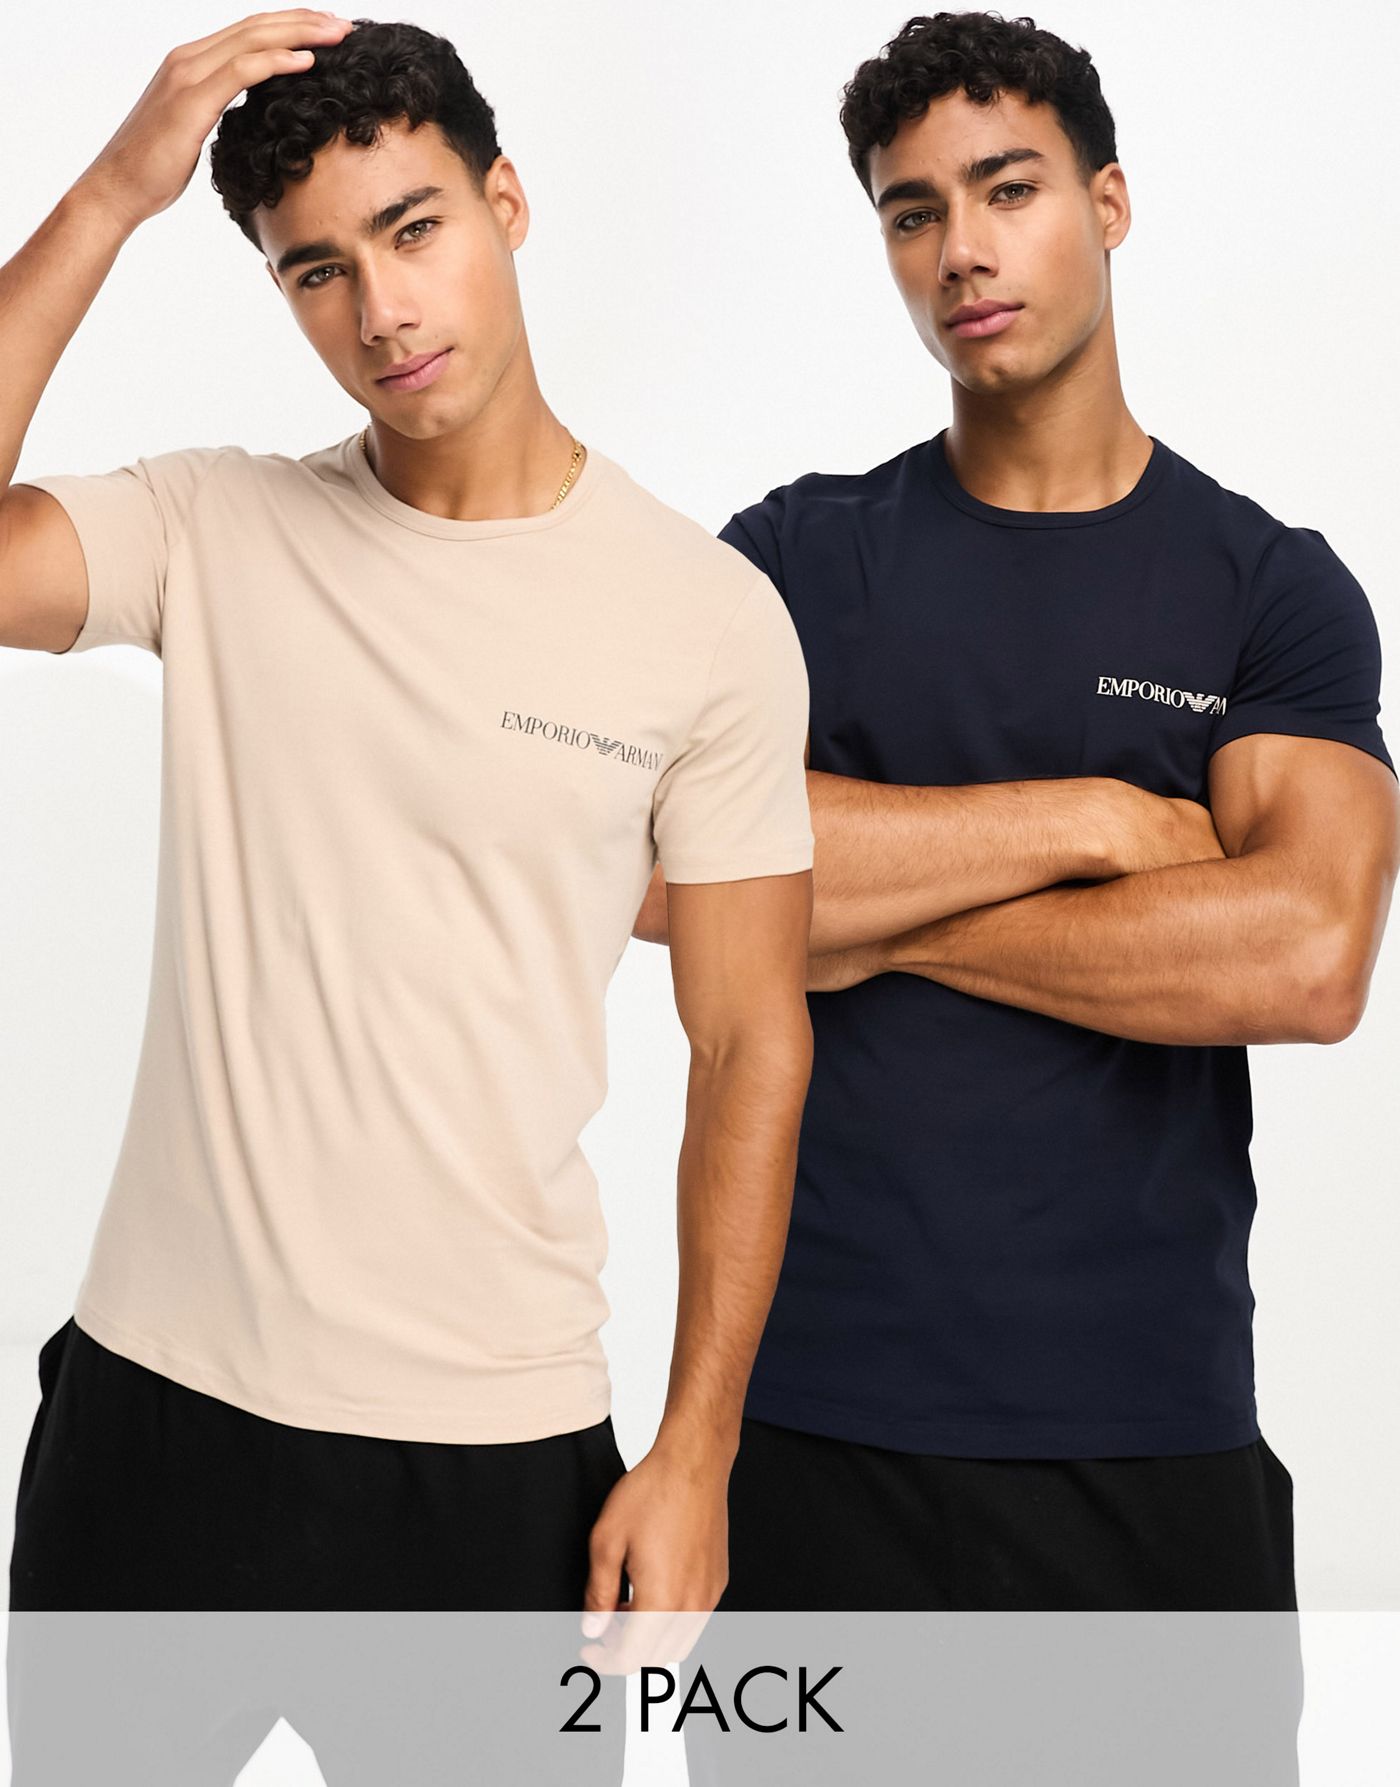 Emporio Armani bodywear 2 pack t-shirts in navy and beige